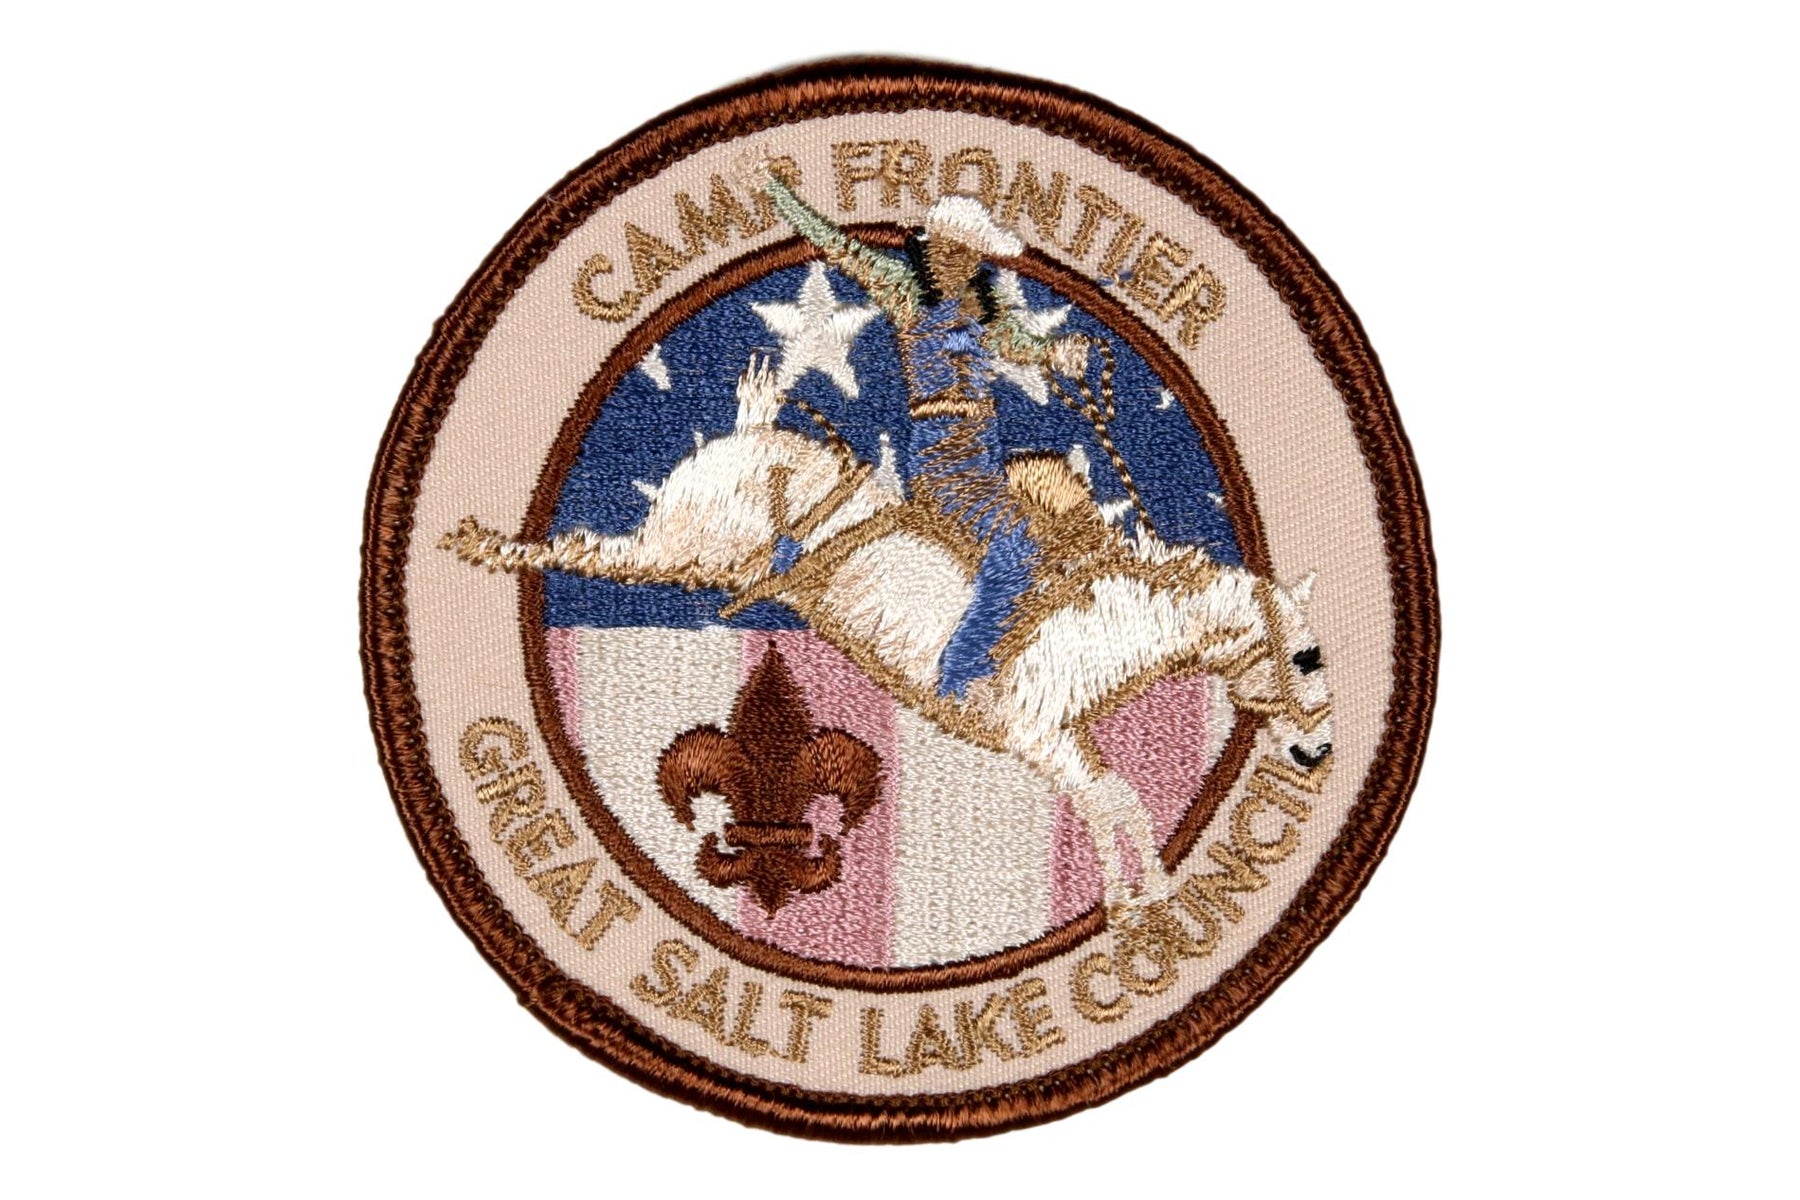 Frontier Camp Patch 2006